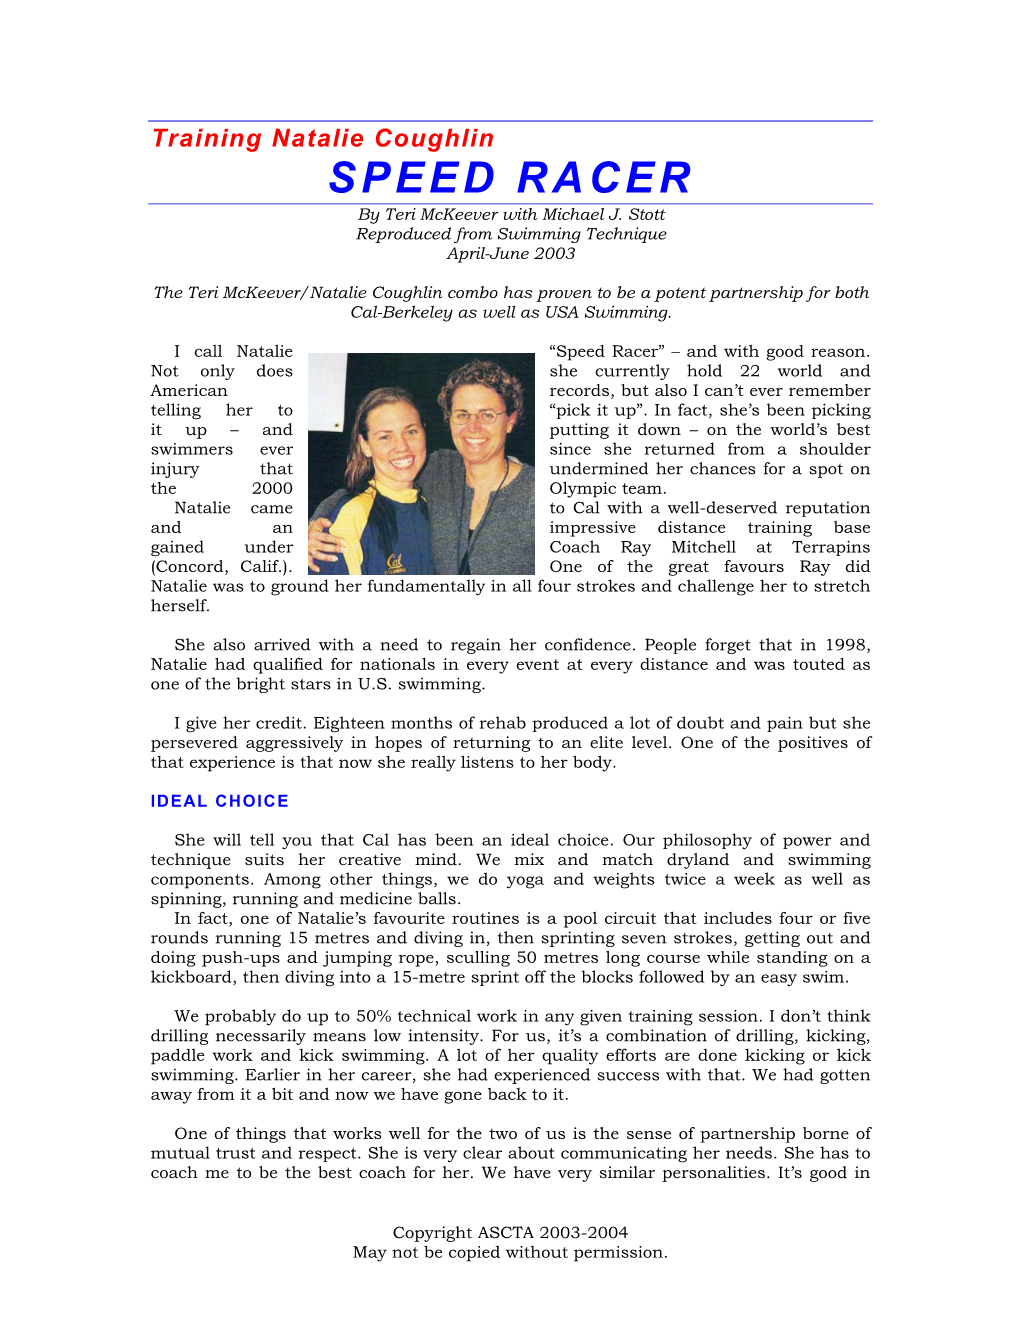 Training Natalie Coughlin SPEED RACER by Teri Mckeever with Michael J